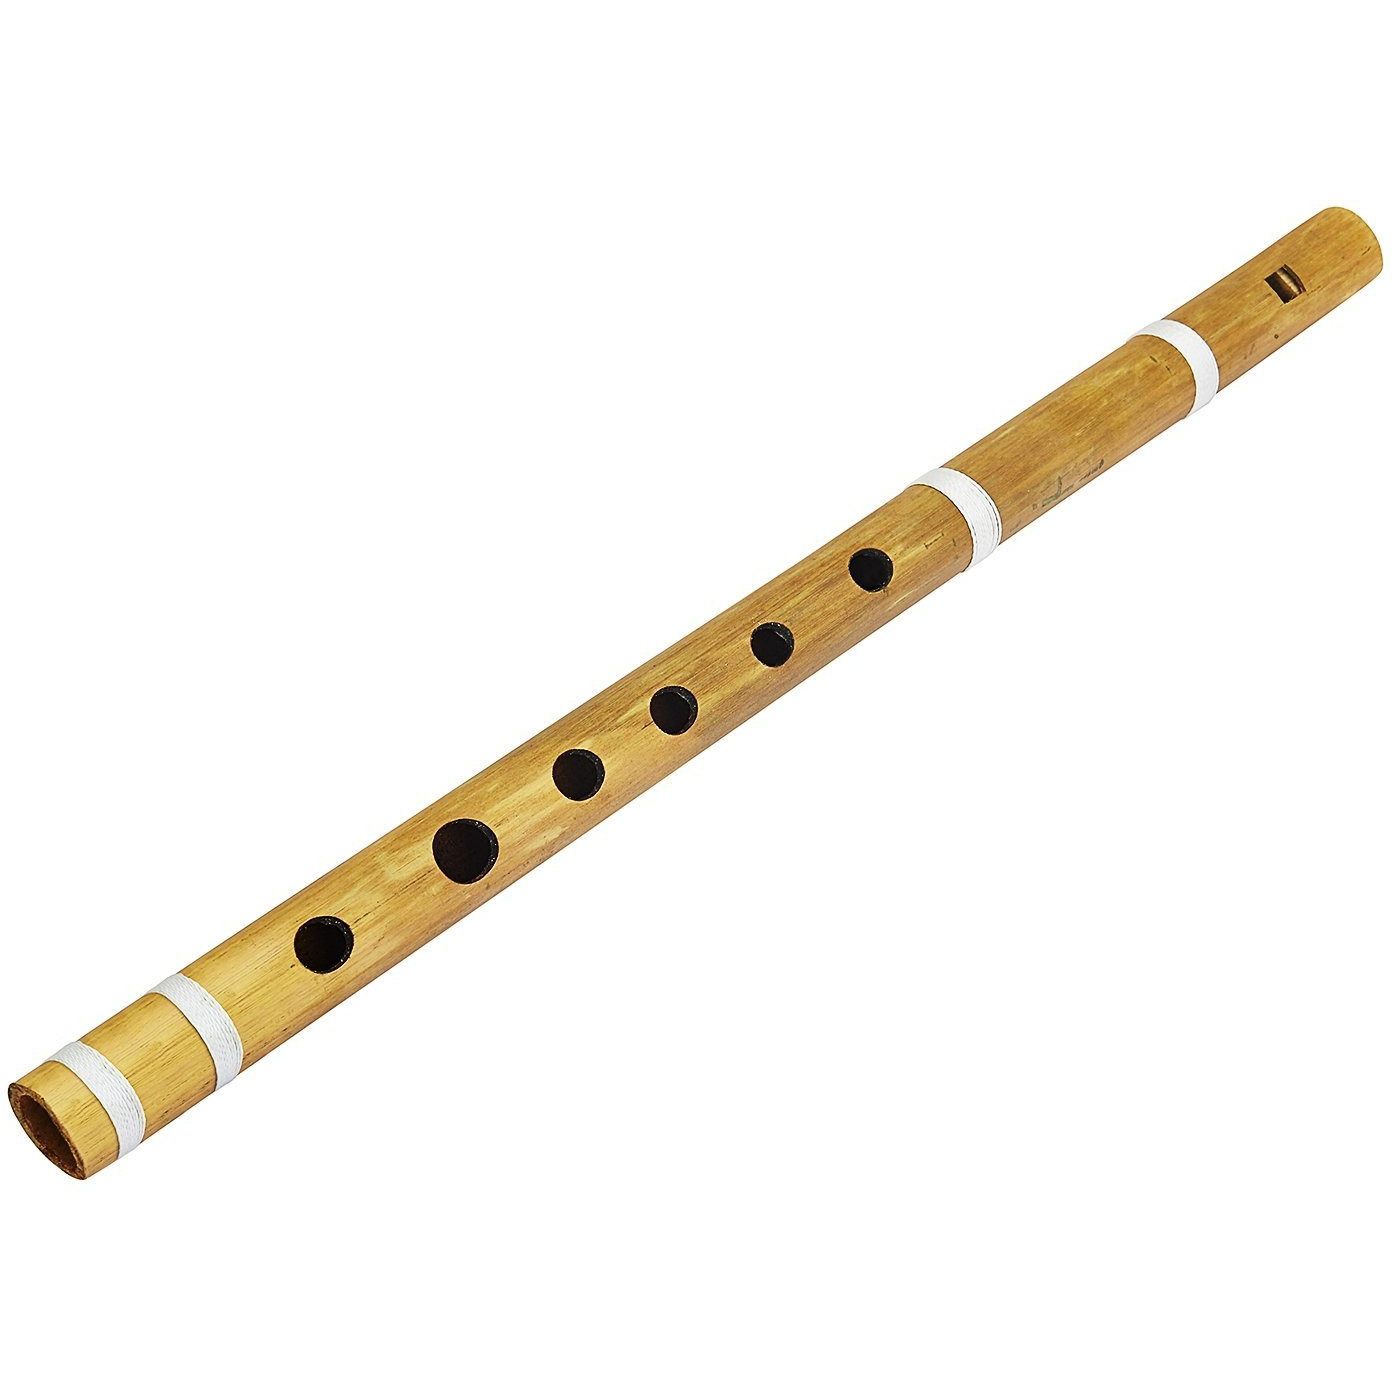 Buy Online Indian Bamboo Flute Fipple High Frequency Notes